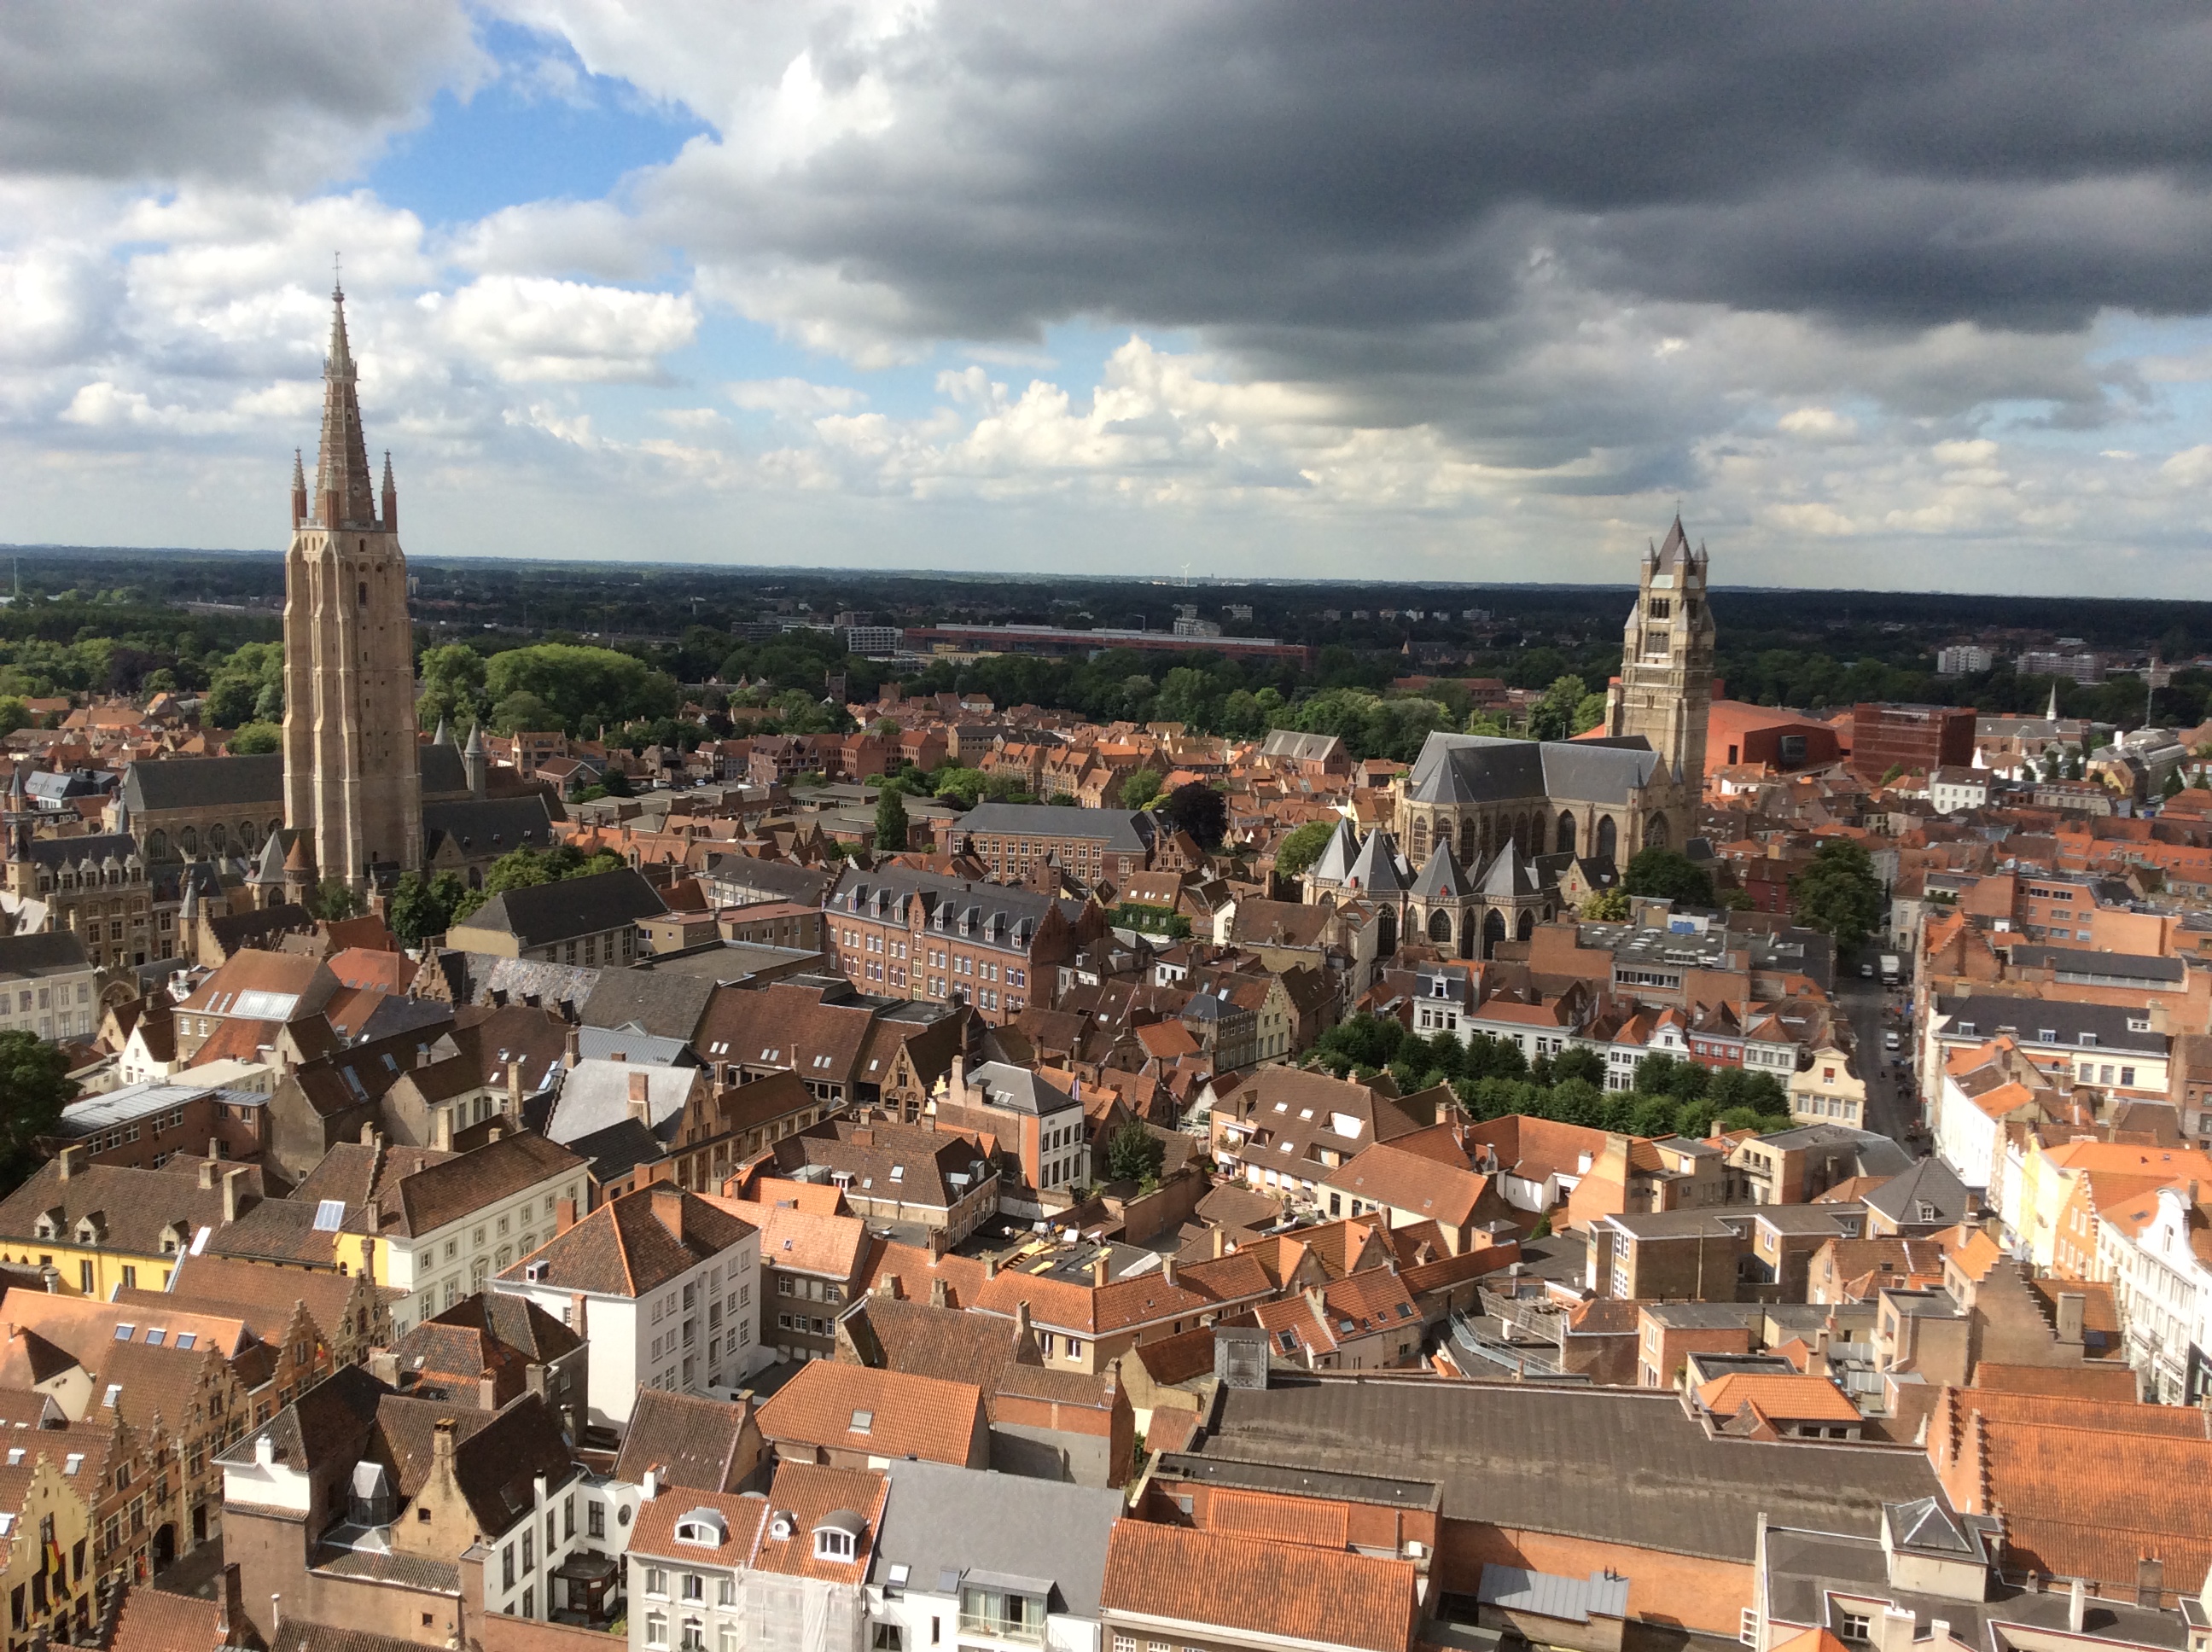 A Mostly Pictures Trip Report: Part 1 Bruges